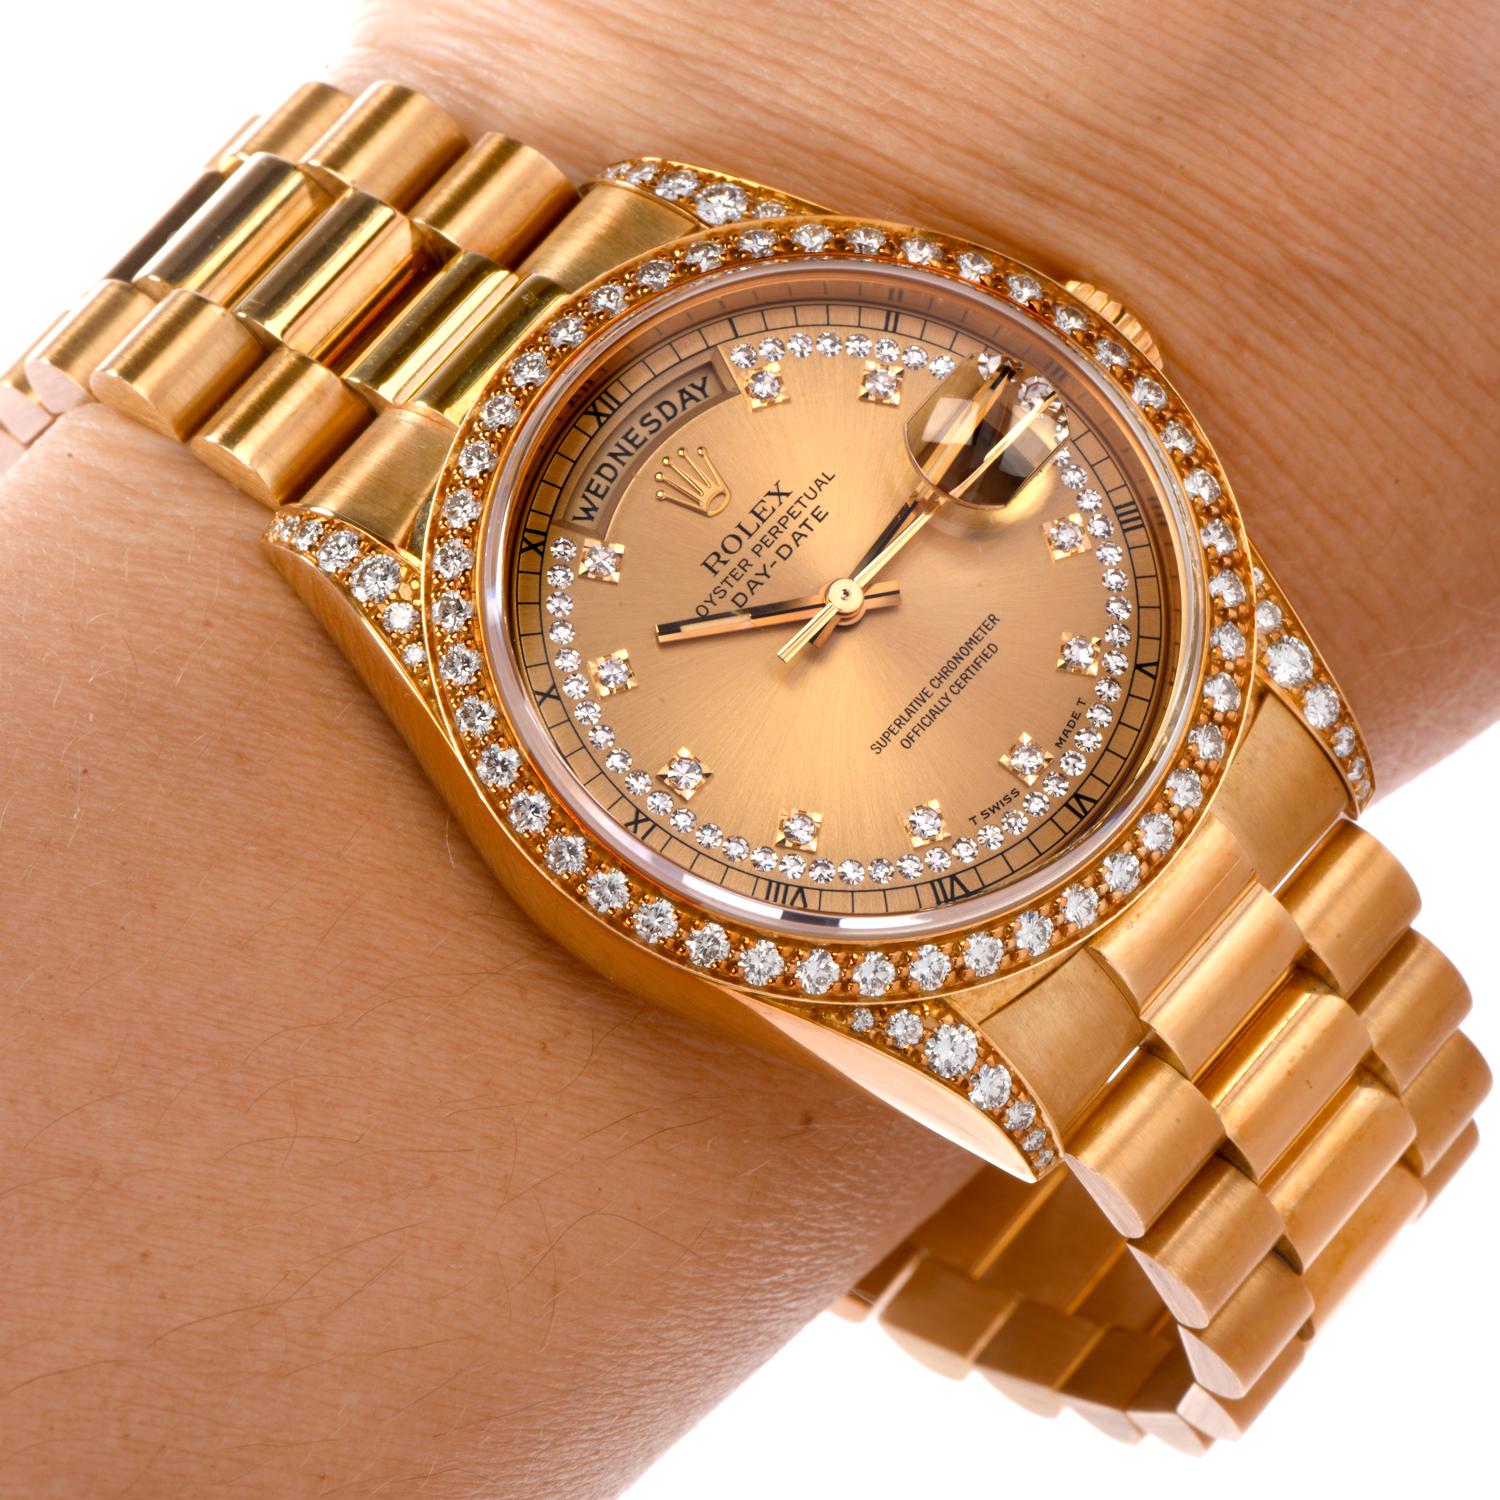 Rolex President Day-Date Diamond String & Log Dial Bezel Watch18388 In Excellent Condition For Sale In Miami, FL